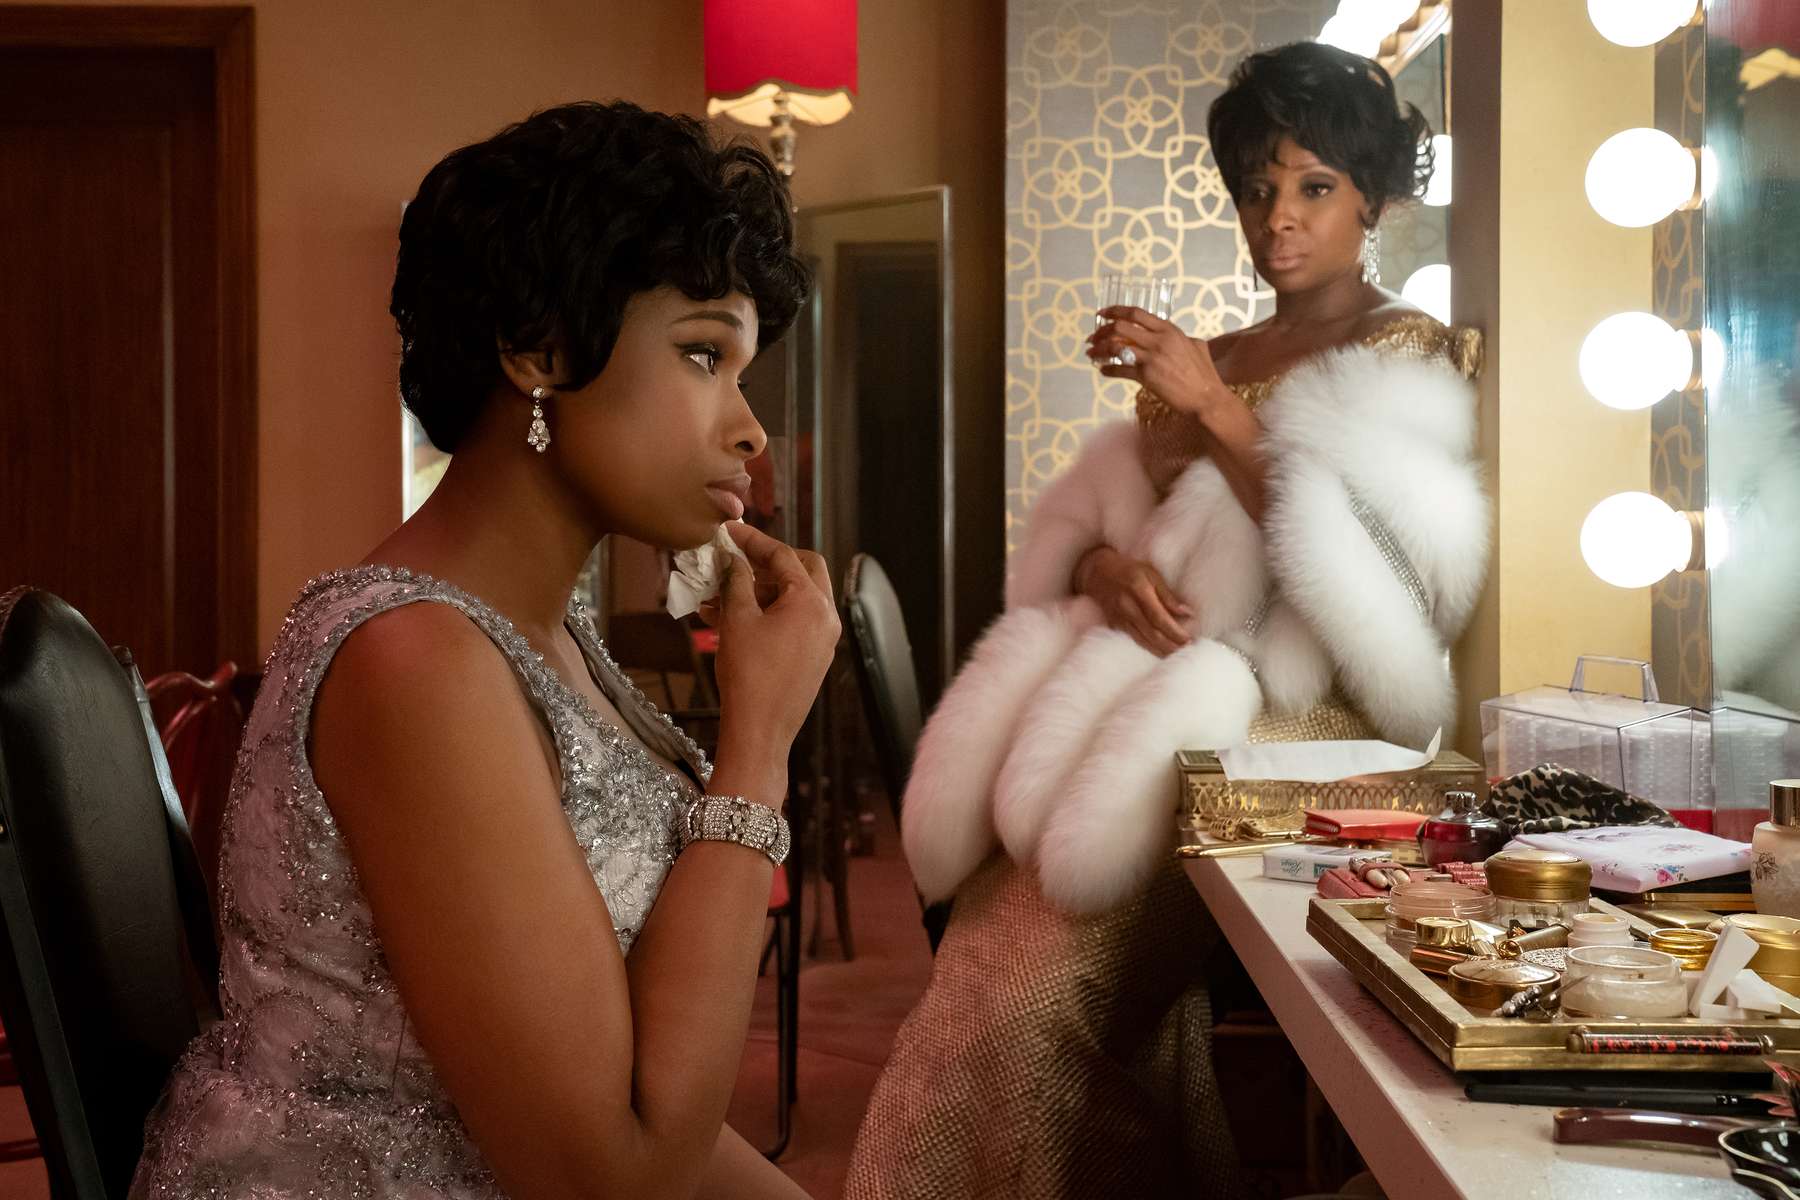  R_09165_RCJennifer Hudson stars as Aretha Franklin and Mary J. Blige as Dinah Washington inRESPECT, A Metro Goldwyn Mayer Pictures filmPhoto credit: Quantrell D. Colbert